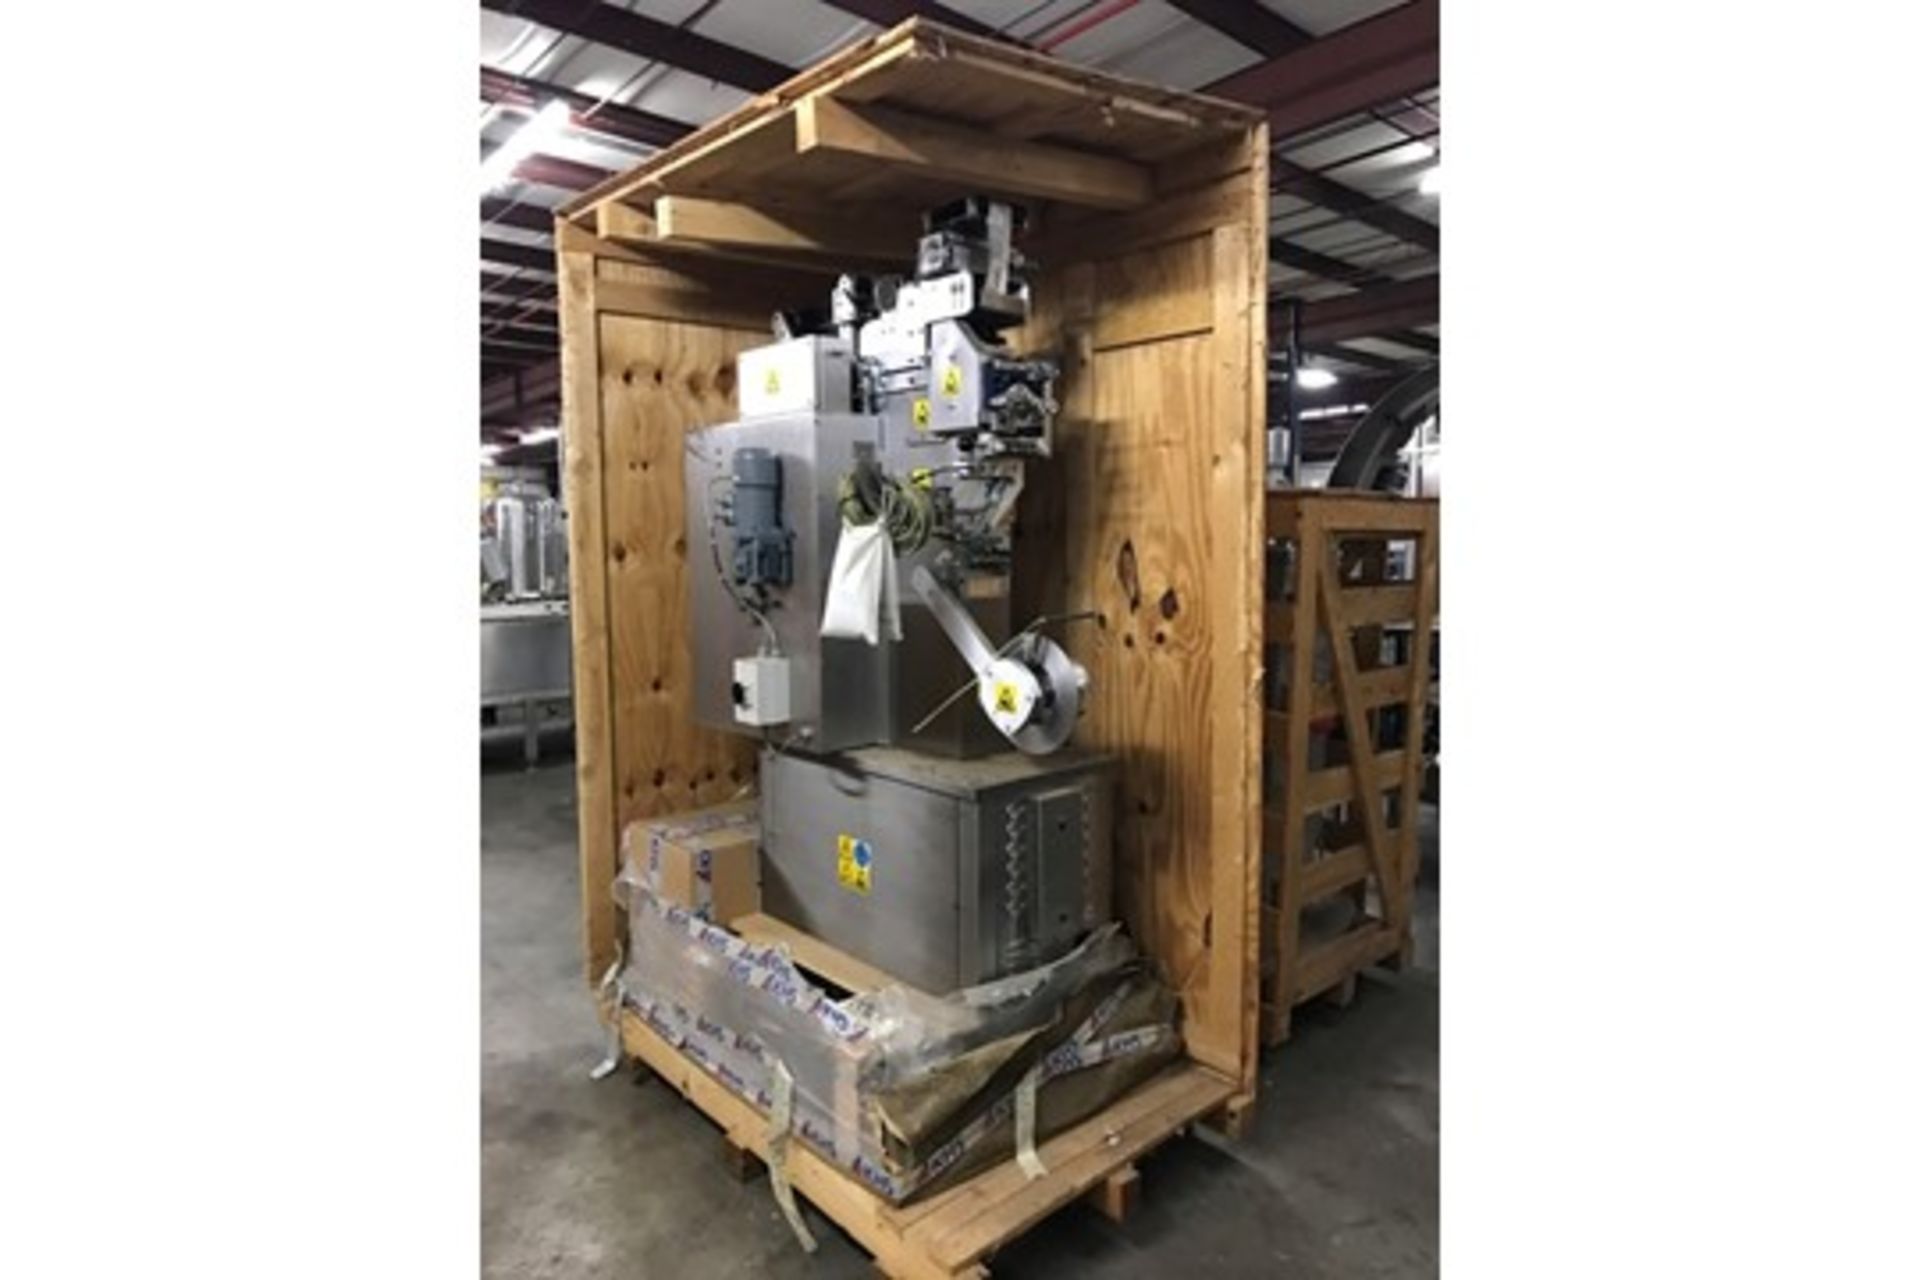 2007 Fords Packaging Systems PressStainless Steel Package, Includes Control Panel, Cap Size 33 x 4.